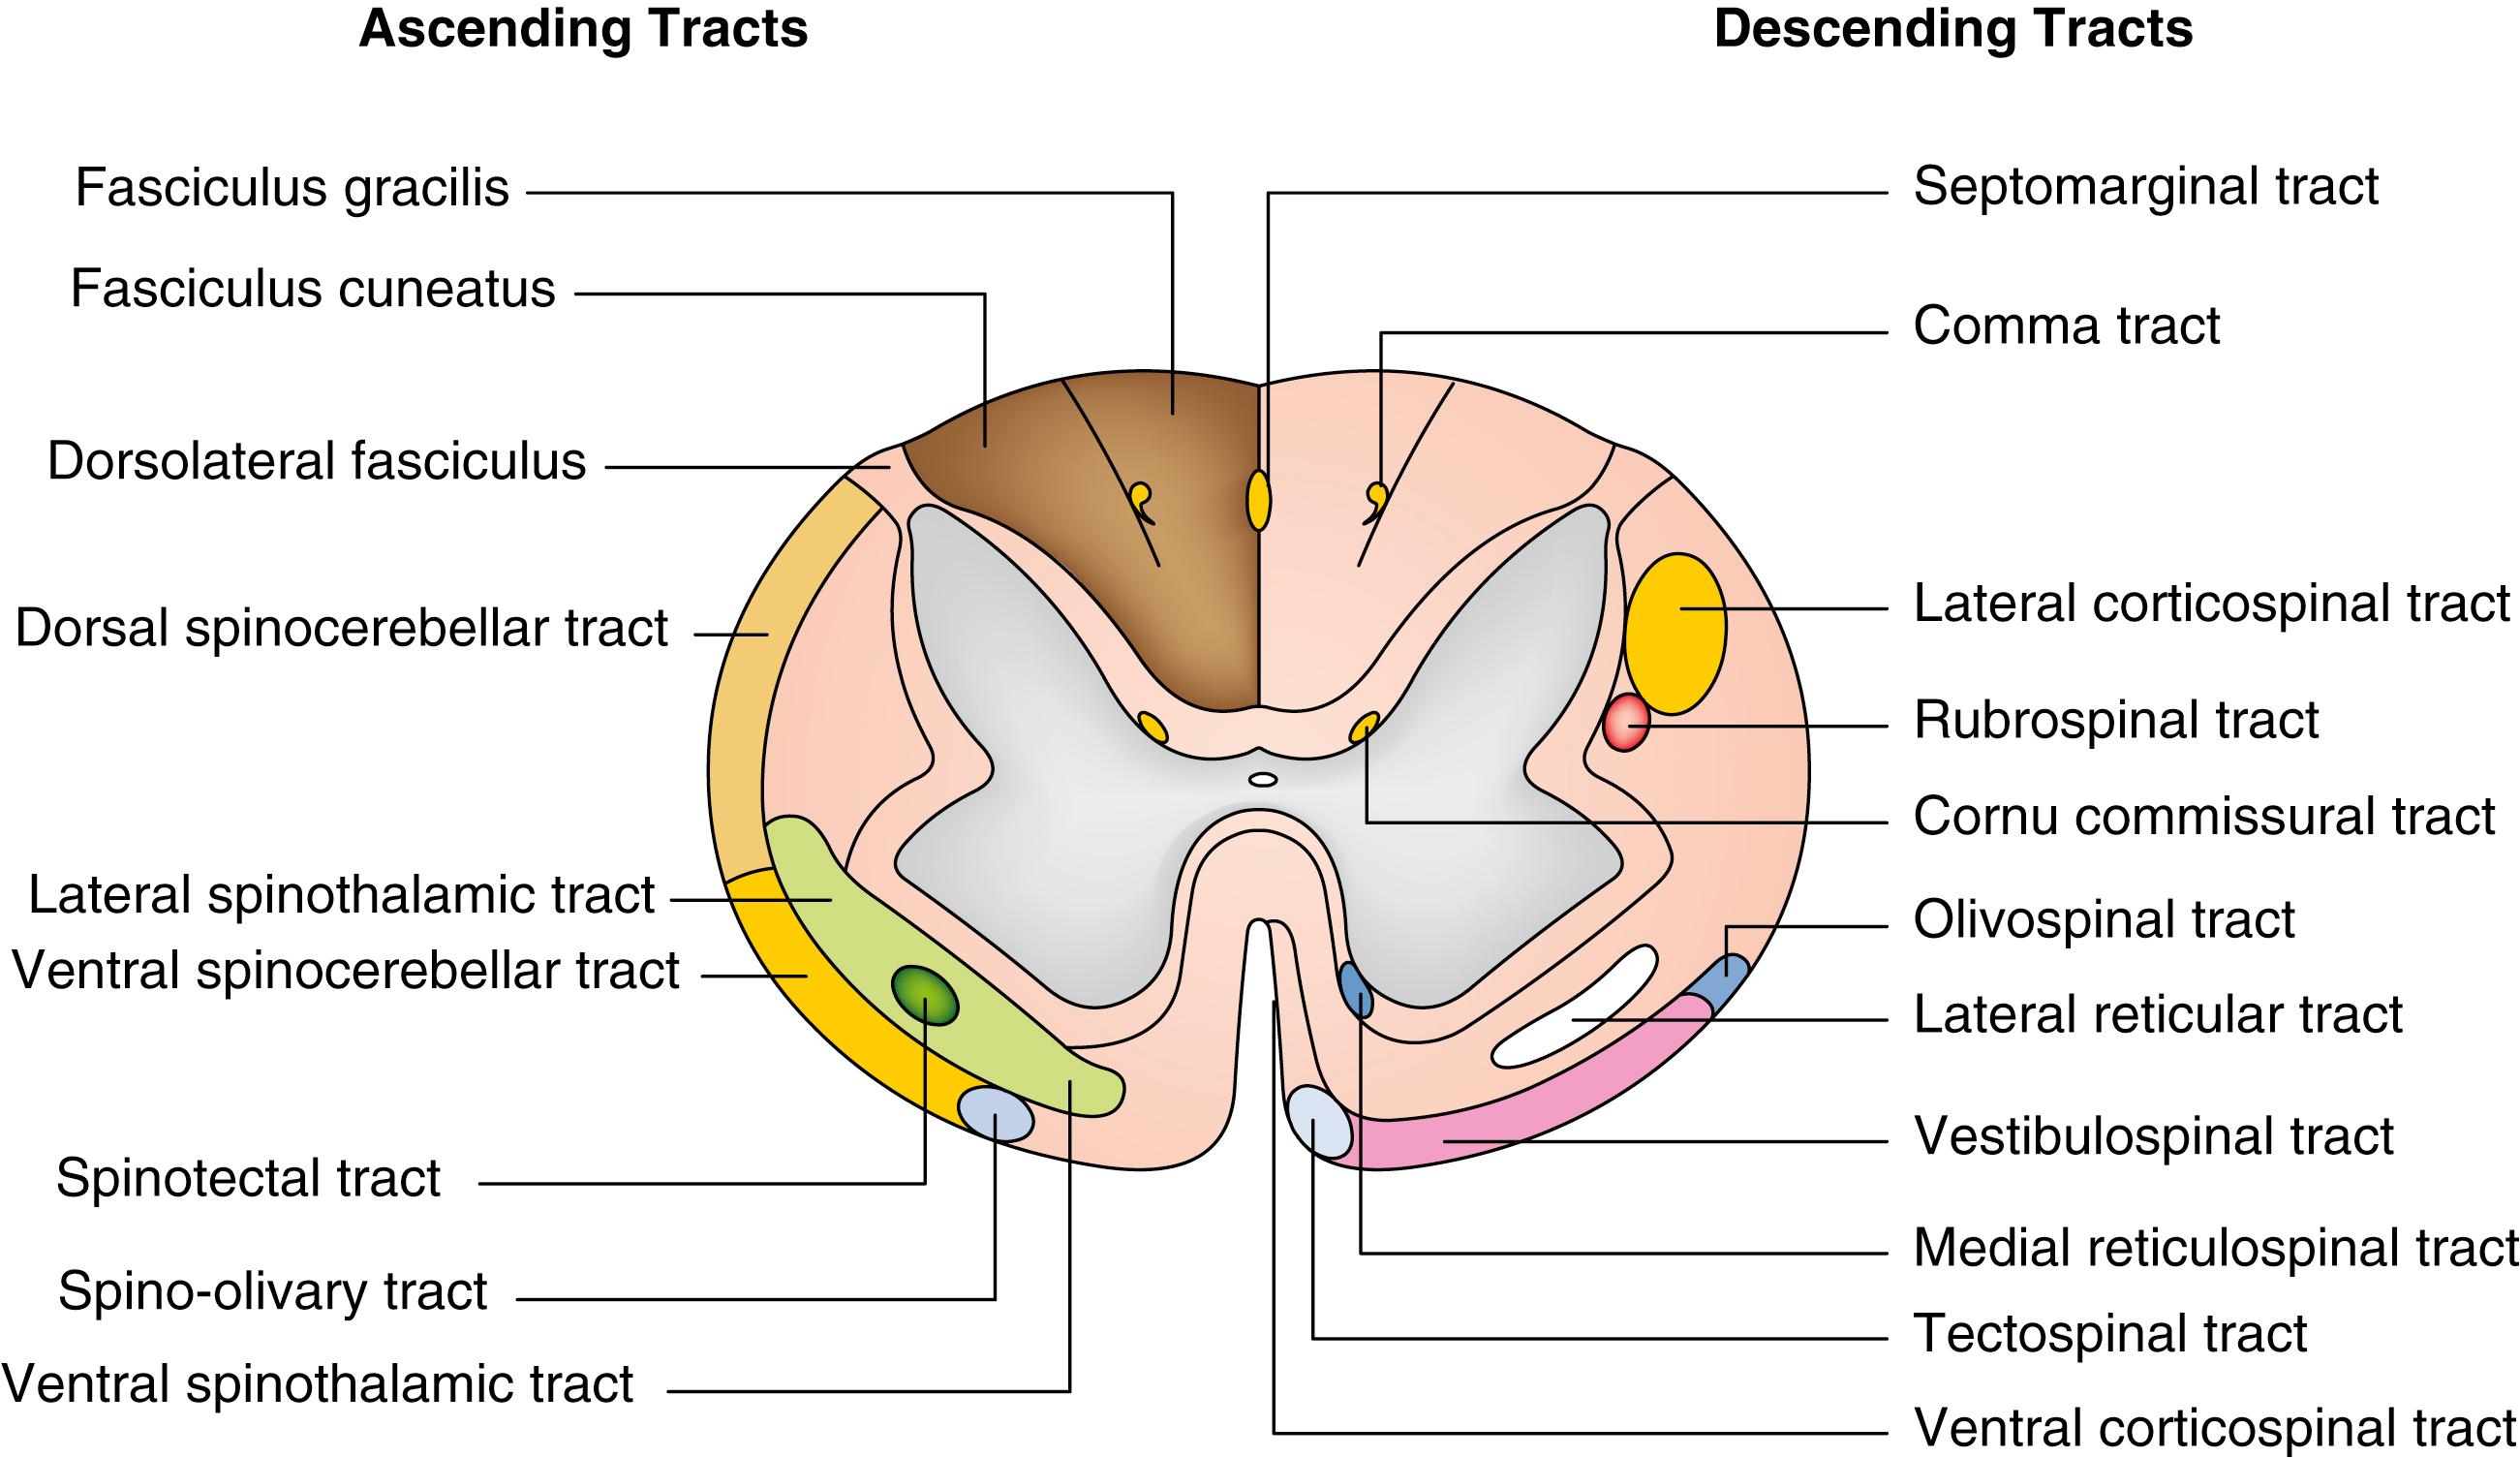 Fig. 11.2, White matter tracts of the spinal cord. Cross section of the spinal cord highlighting the major descending and ascending white matter tracts.